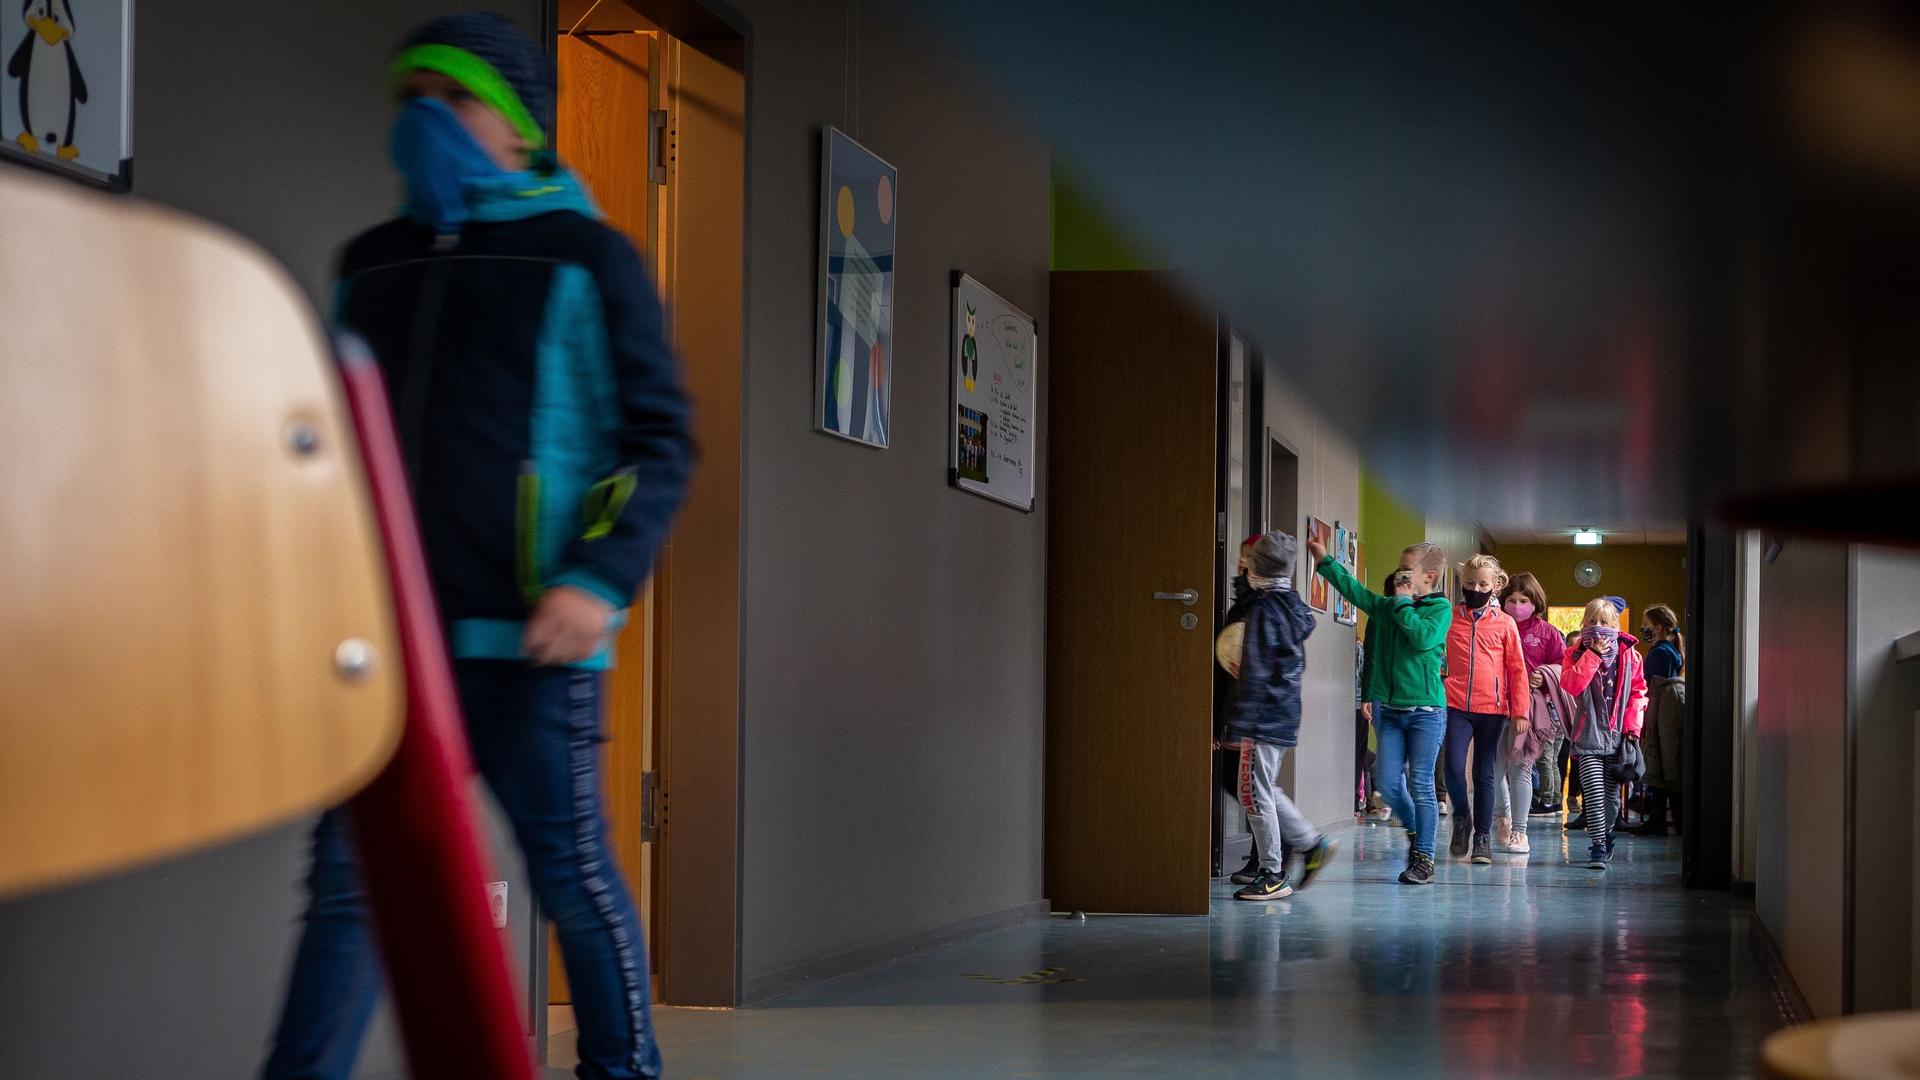 Students return to class after recess at Weimar Schöndorf primary school in Germany.